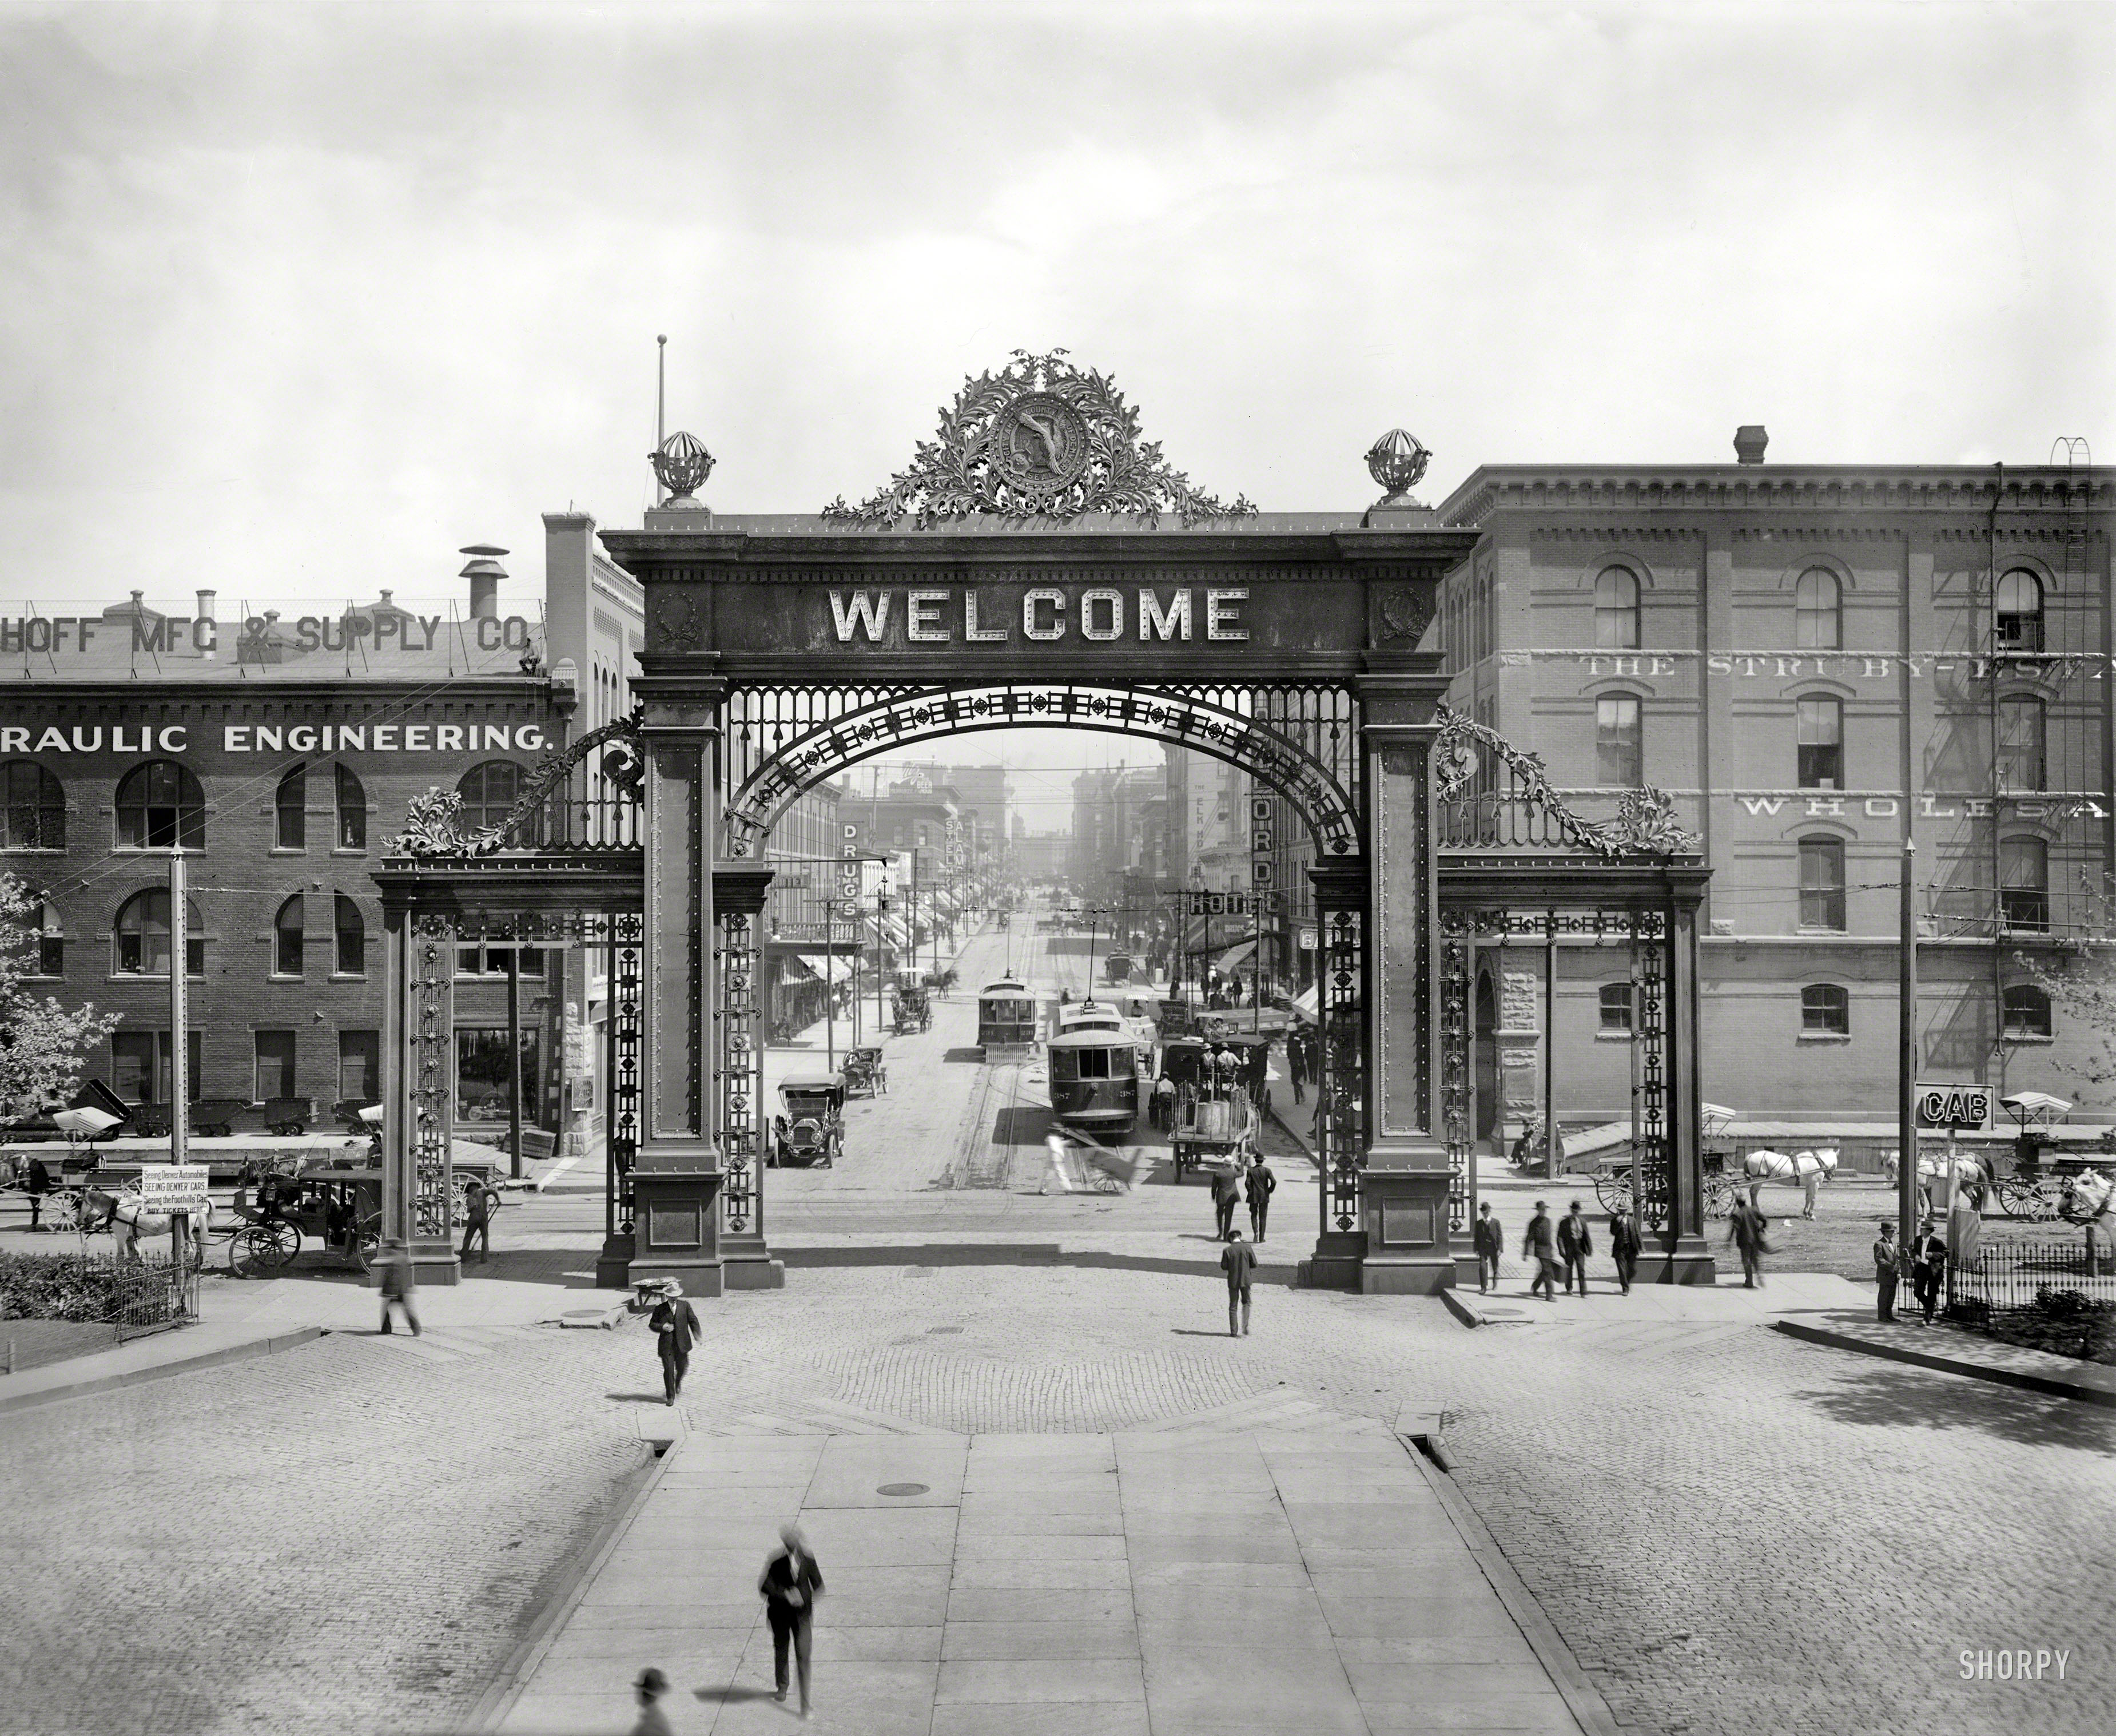 Denver, Colorado, circa 1908. "Welcome arch at Union Depot looking down 17th Street." The arch, with the Hebrew benediction "mizpah" soon replacing WELCOME on the other (departure) side, was torn down in 1931. View full size.